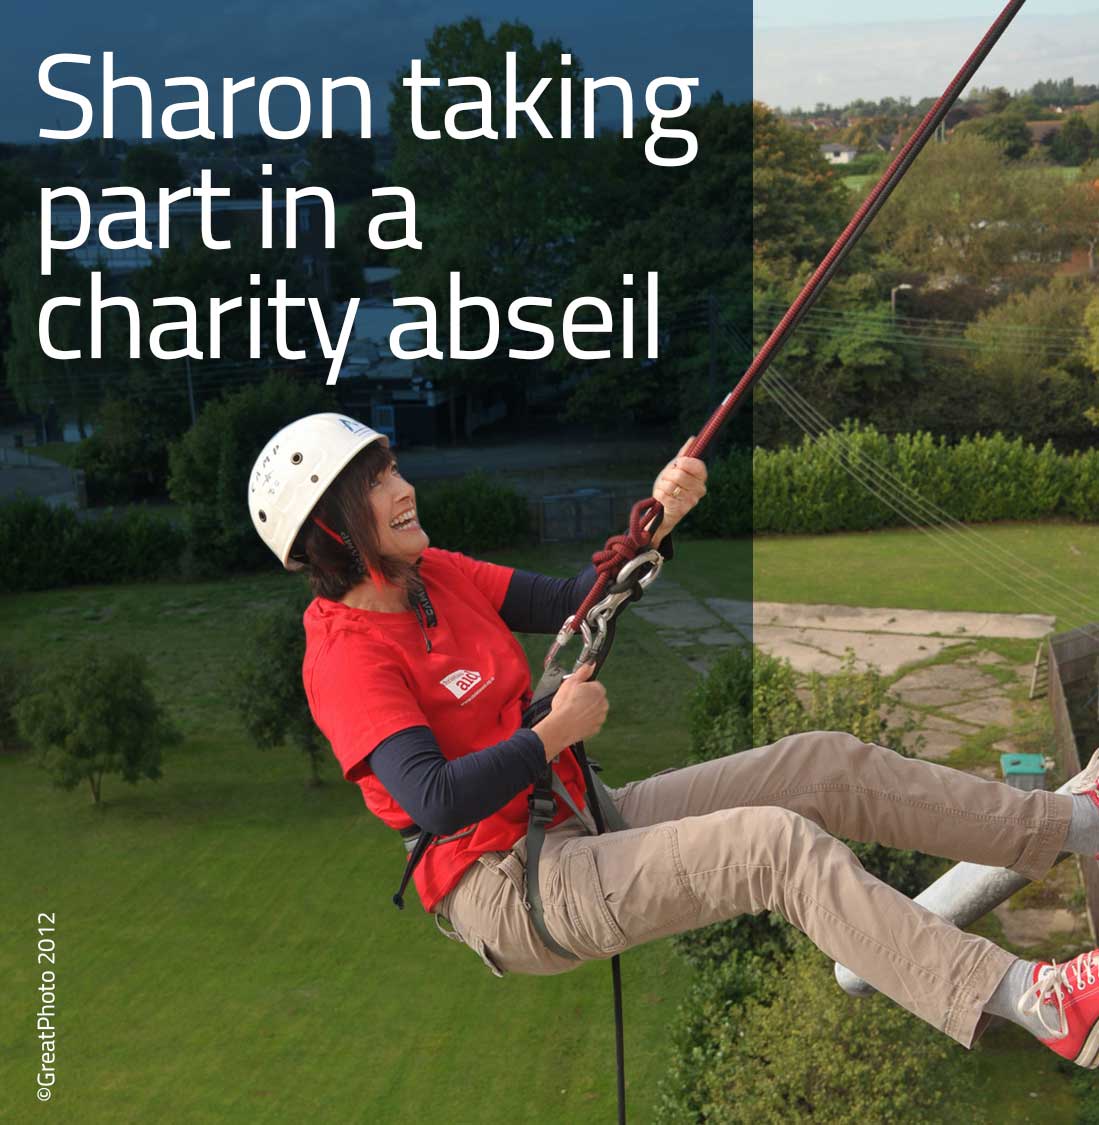 Sharon taking part in a charity abseil.